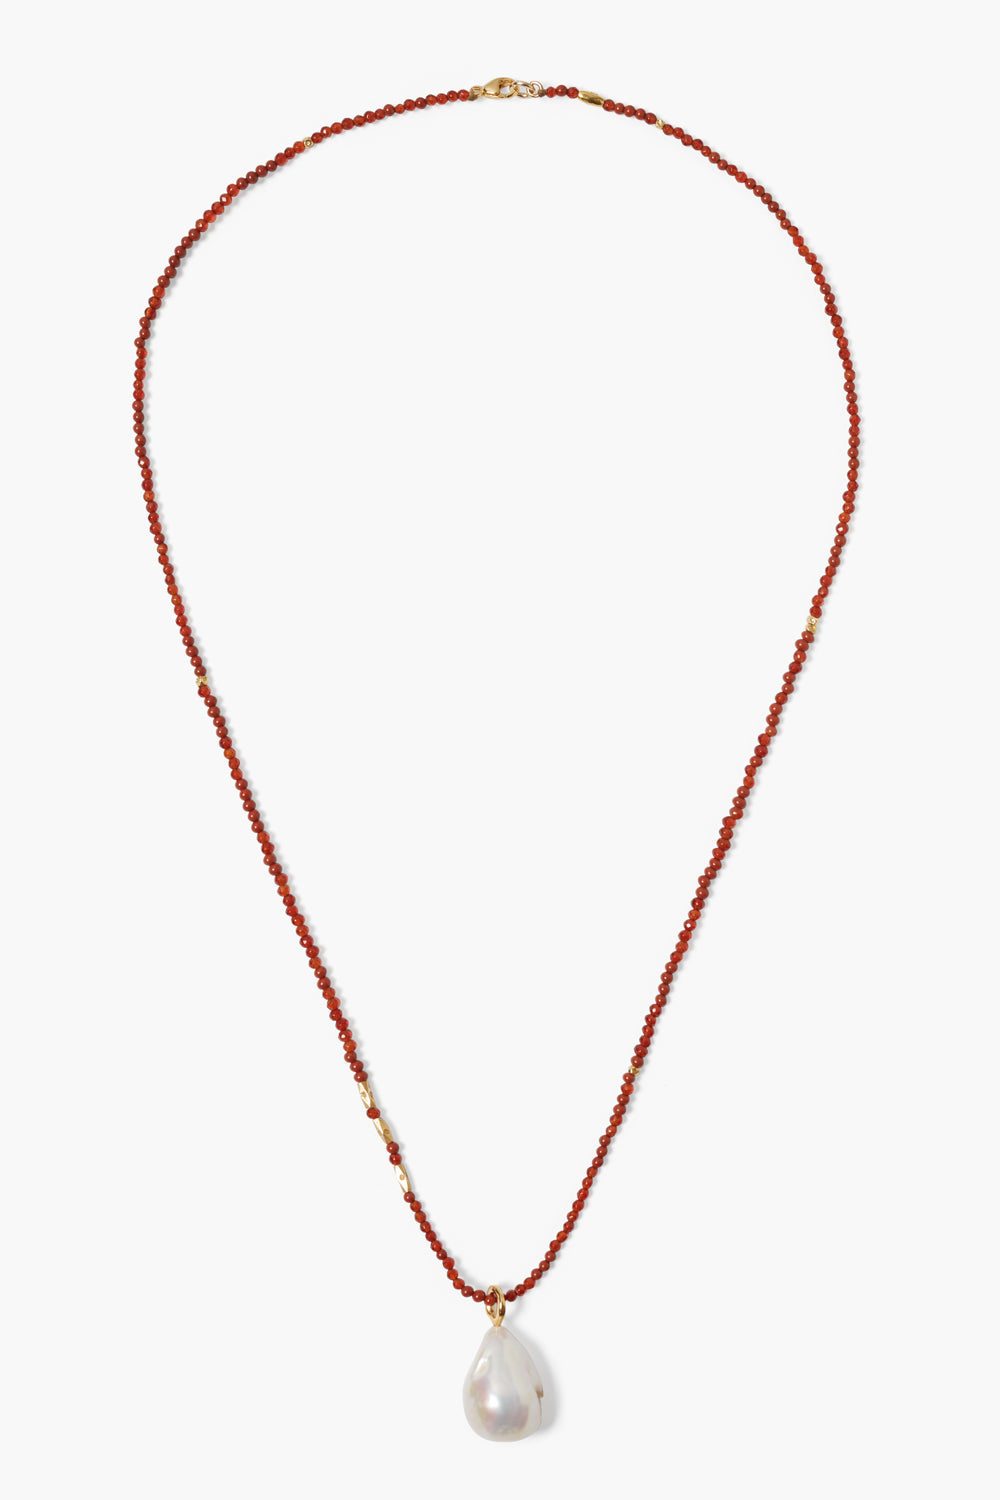 BAROQUE PEARL NECKLACE-CARNELIAN MIX - Kingfisher Road - Online Boutique